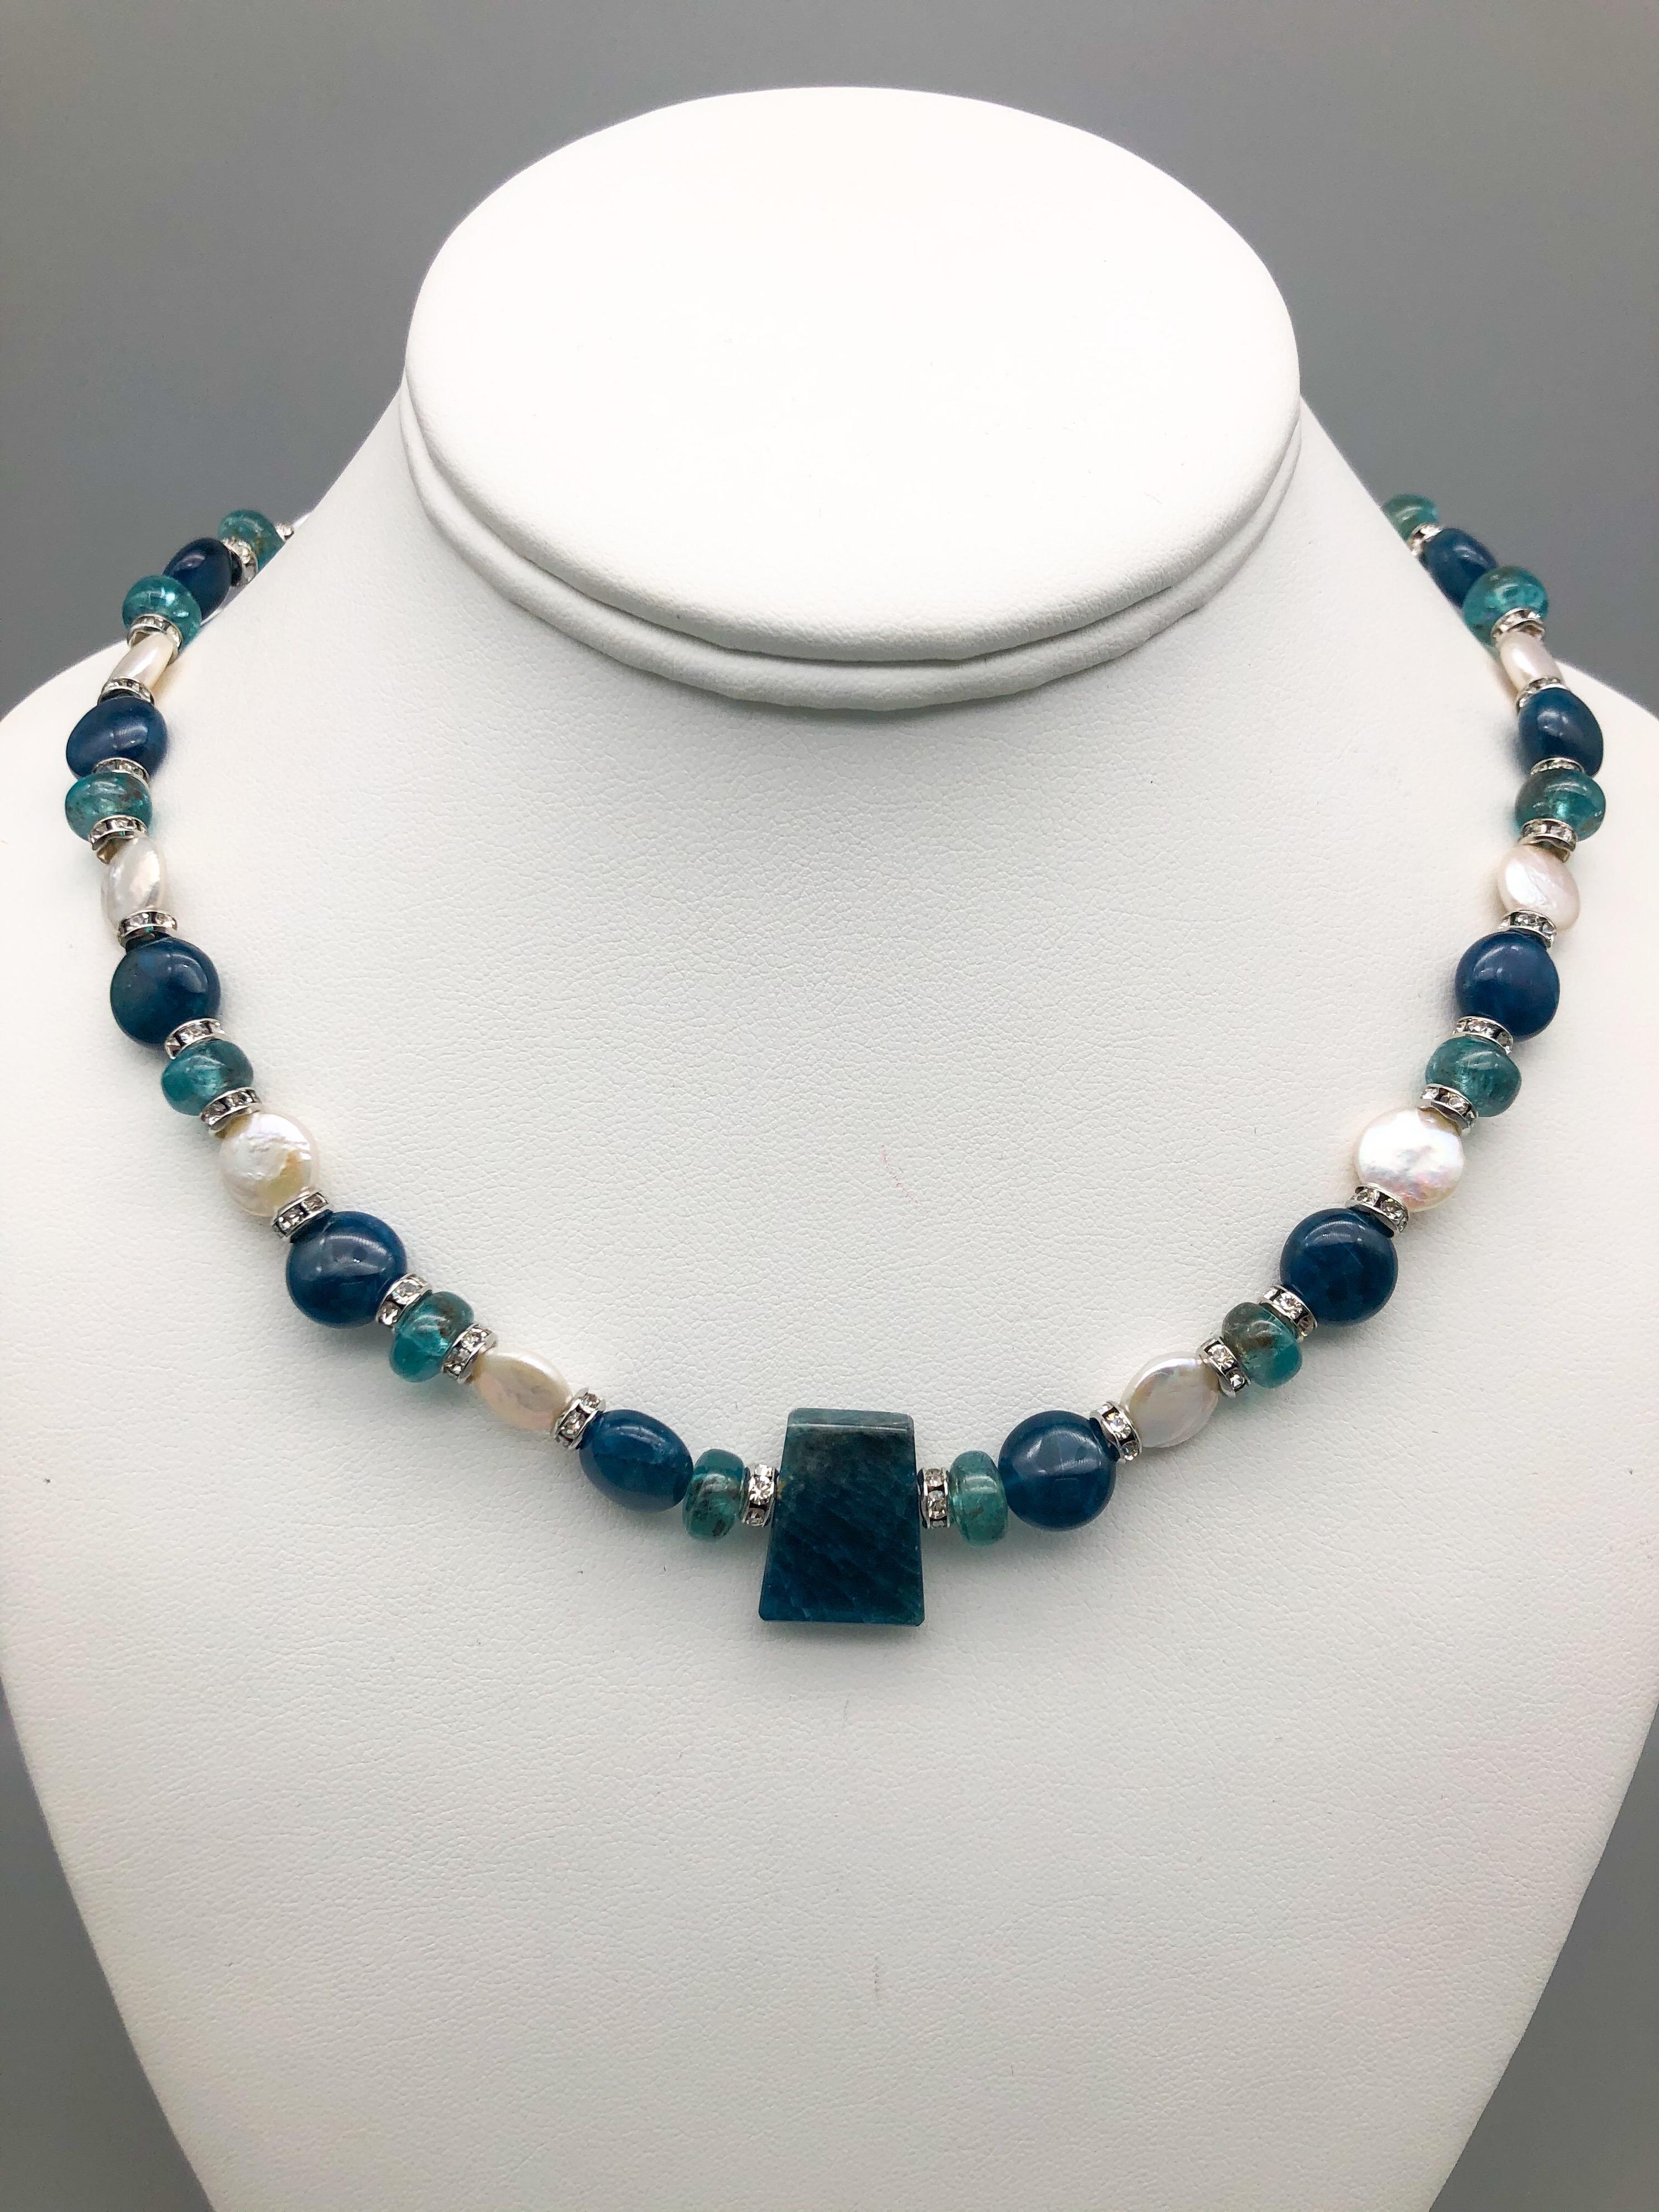 One-of-a-Kind

Sometimes simplest is best. Particularly when the stones are a mix of polished blue Apatite both translucent and opaque that blend and complement each other. The various Apatites are separated by small coin pearls as well as small